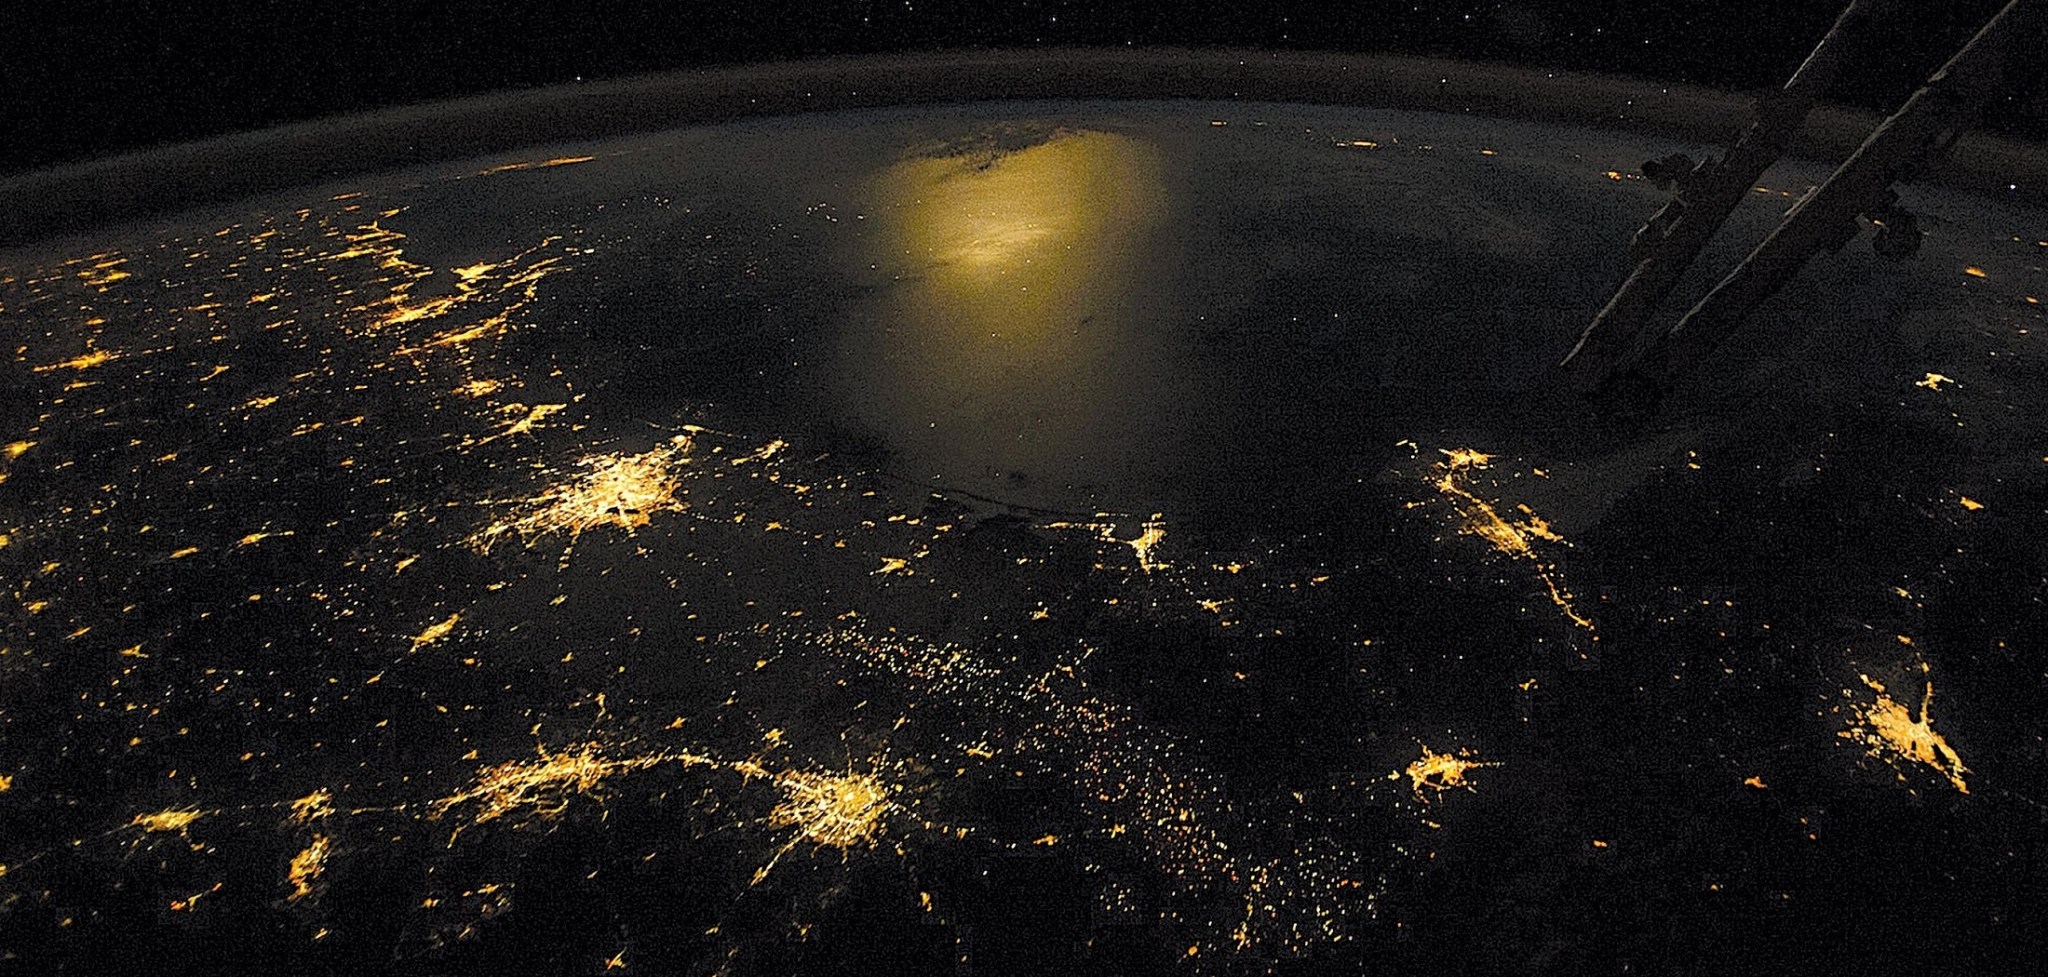 “Earth at Night” shows how scientists use images such as this astronaut photo of the Gulf of Mexico taken from the ISS